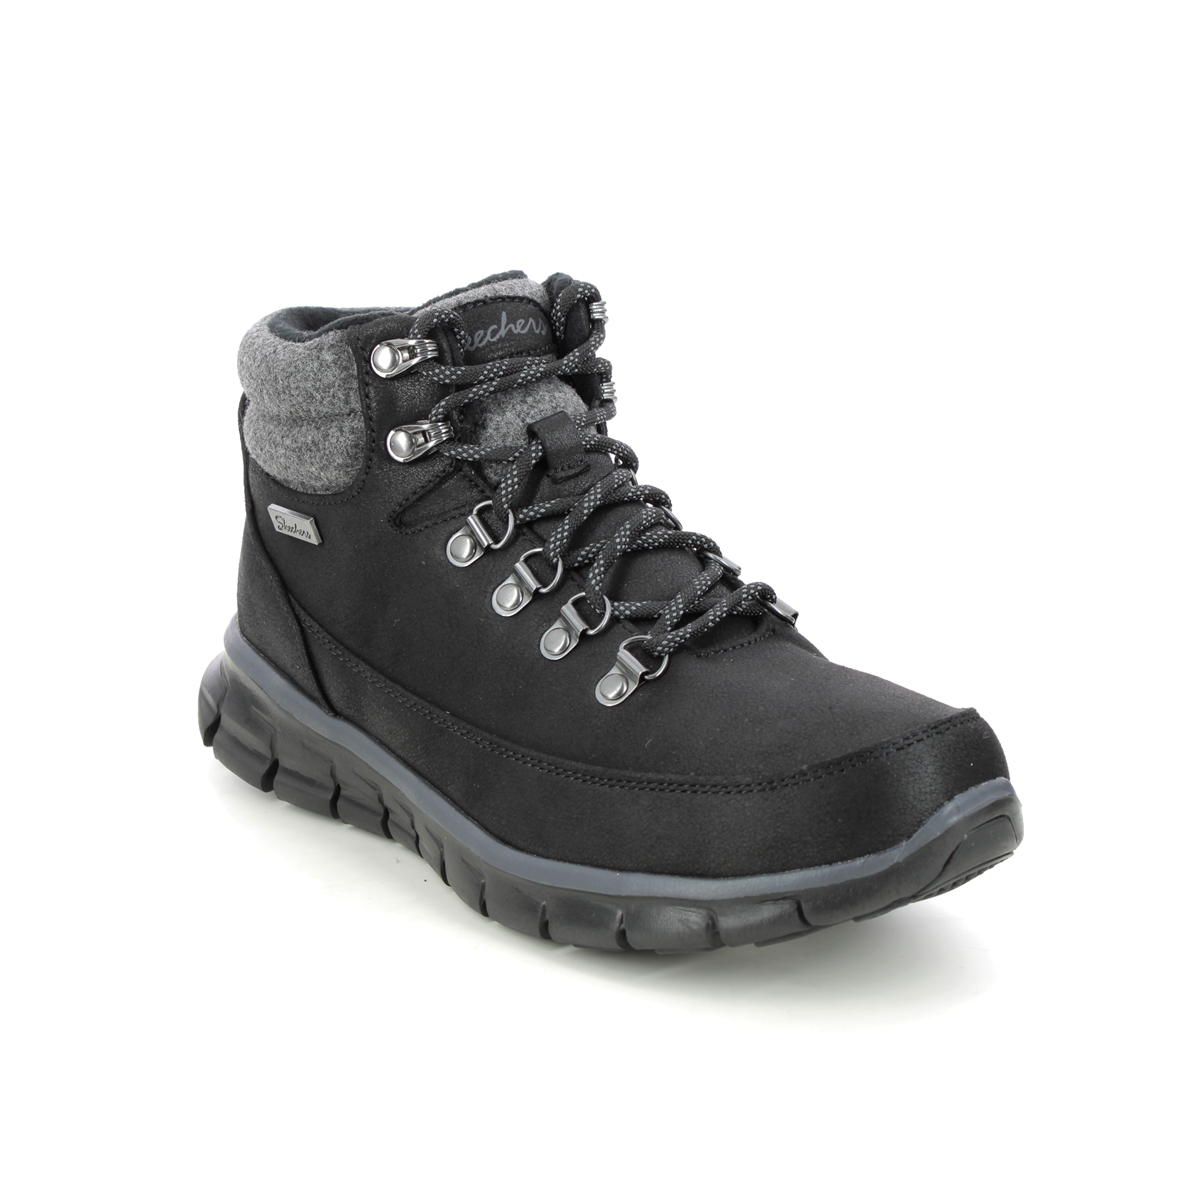 Skechers Winter Nights BLK Black Womens Lace Up Boots 167425 in a Plain Man-made in Size 6